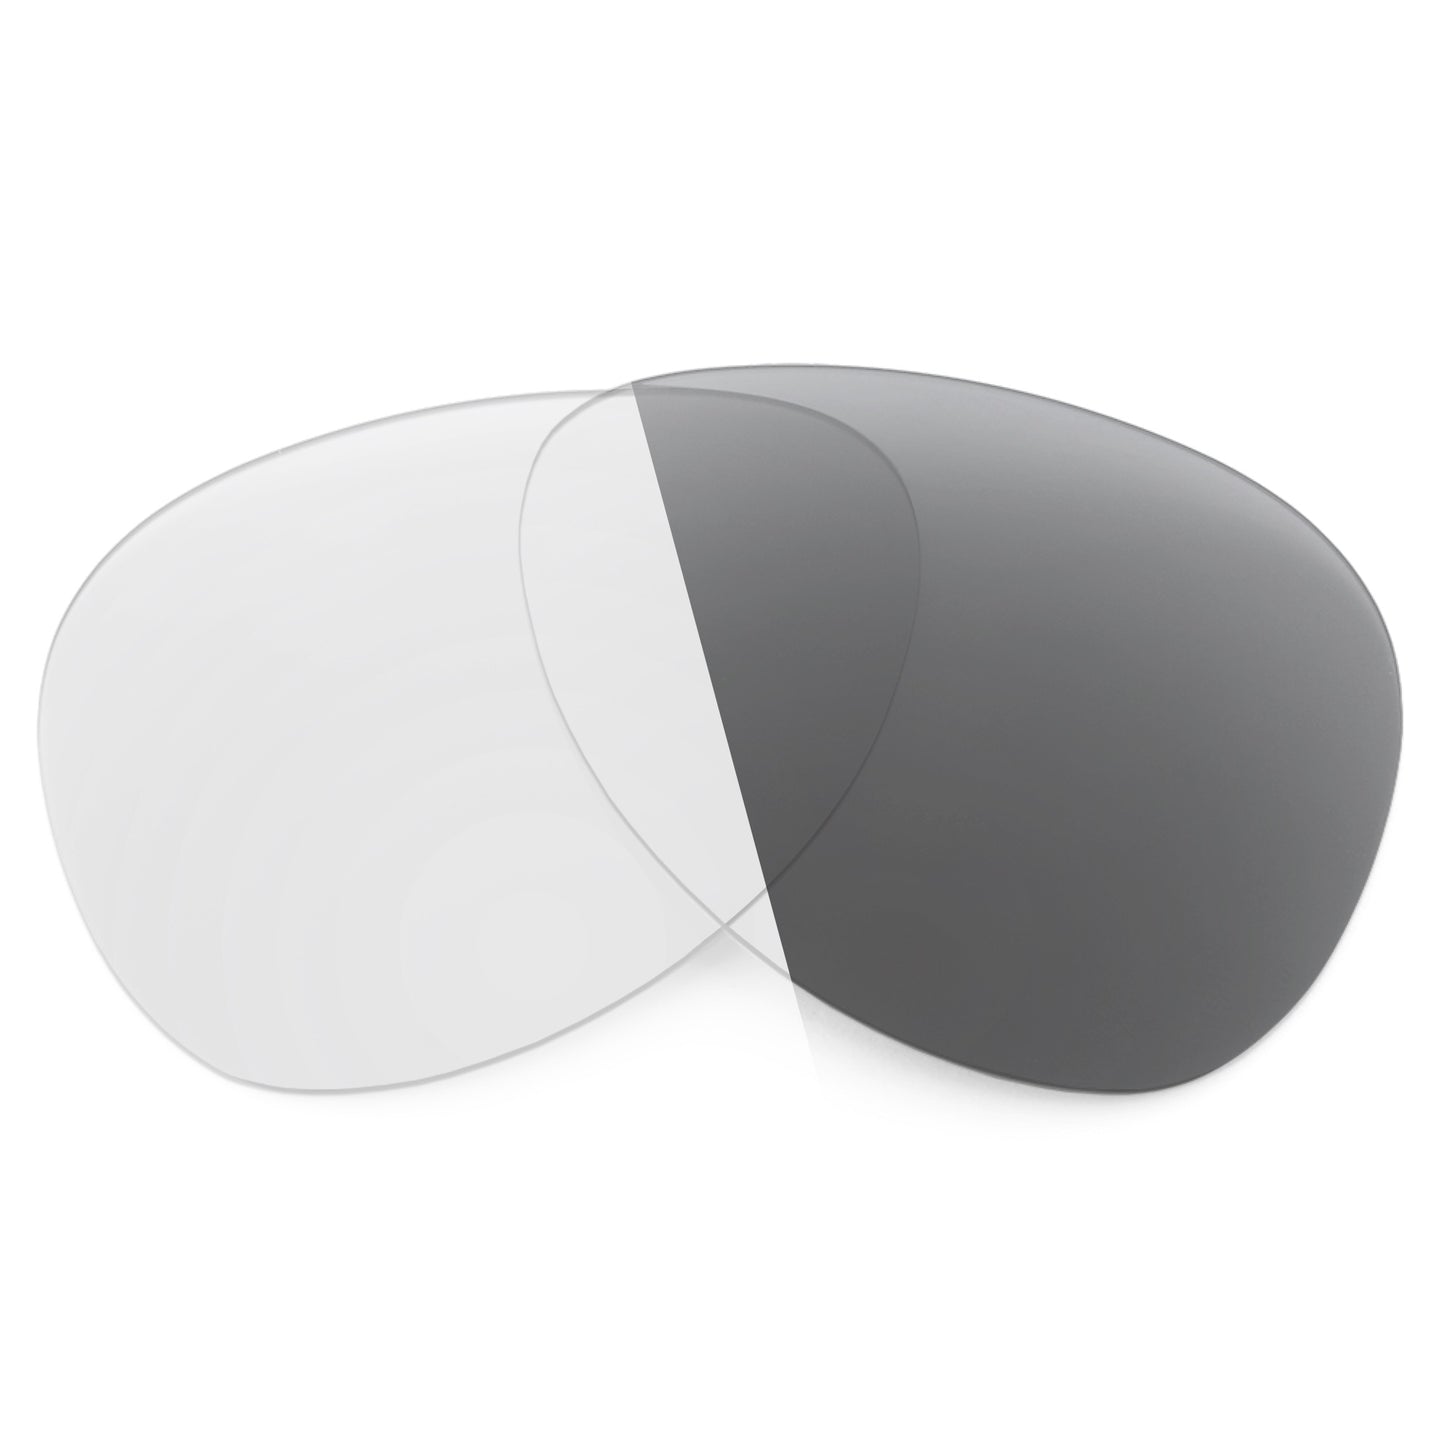 Revant replacement lenses for Ray-Ban Vagabond RB4152 53mm Non-Polarized Adapt Gray Photochromic